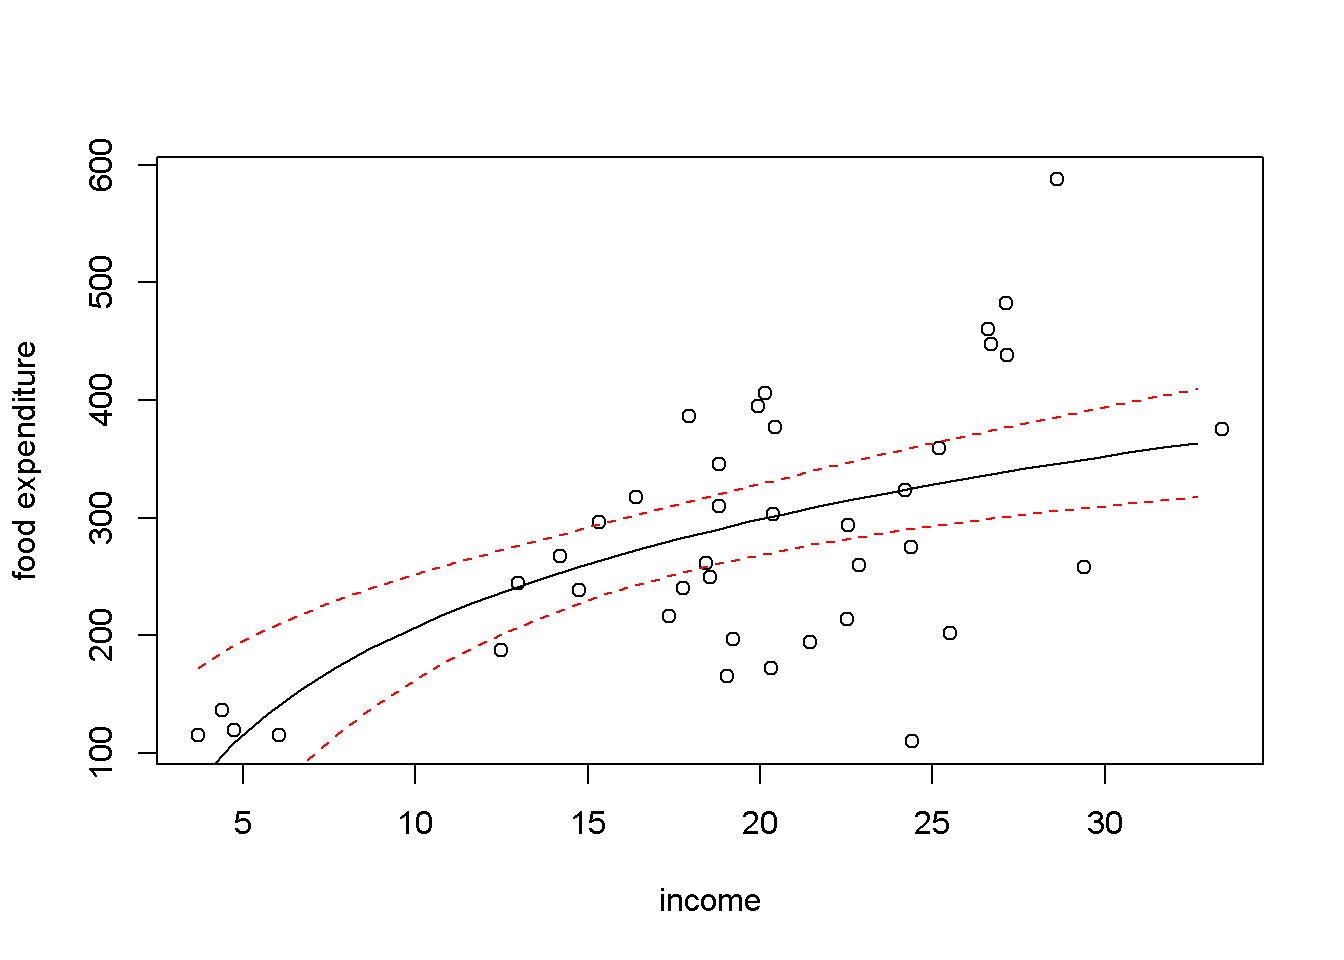 Linear-log representation for the $food$ data